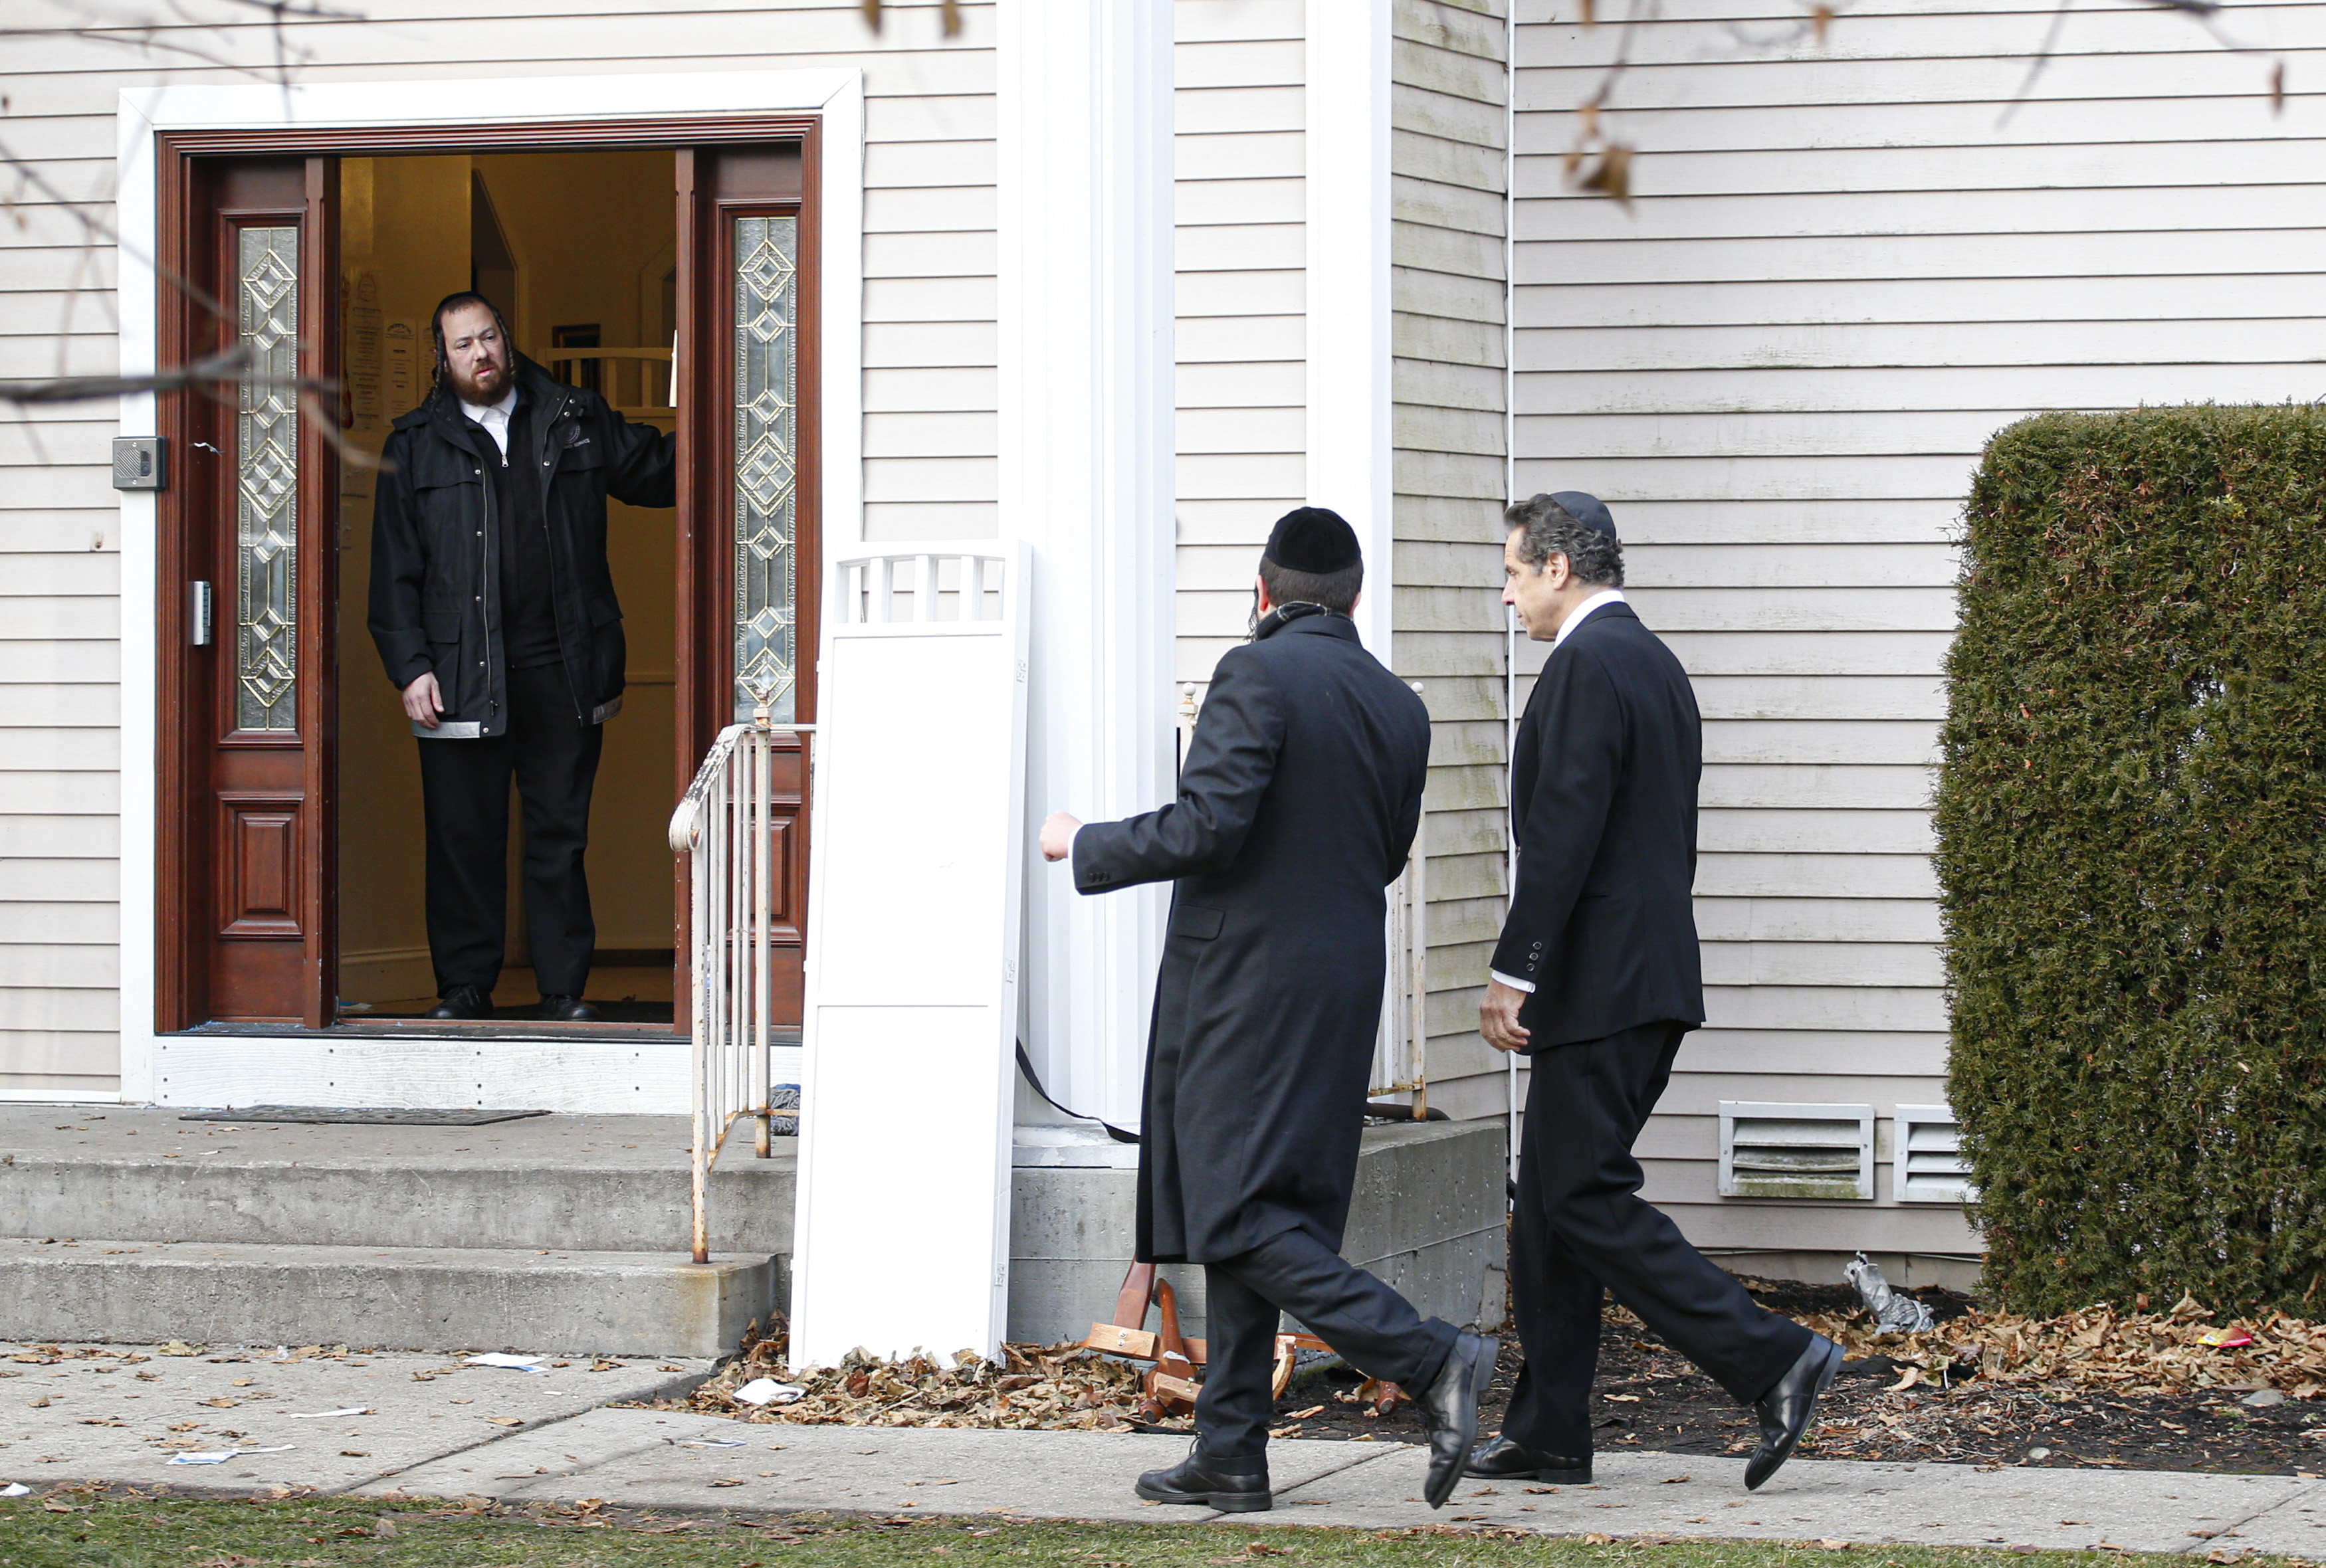 New York Governor Andrew Cuomo arrives to the home of rabbi, Chaim Rottenbergin Monsey, in New York on December 29, 2019 after a machete attack that took place earlier outside the rabbi's home during the Jewish festival of Hanukkah in Monsey, New York. (KENA BETANCUR/AFP via Getty Images)